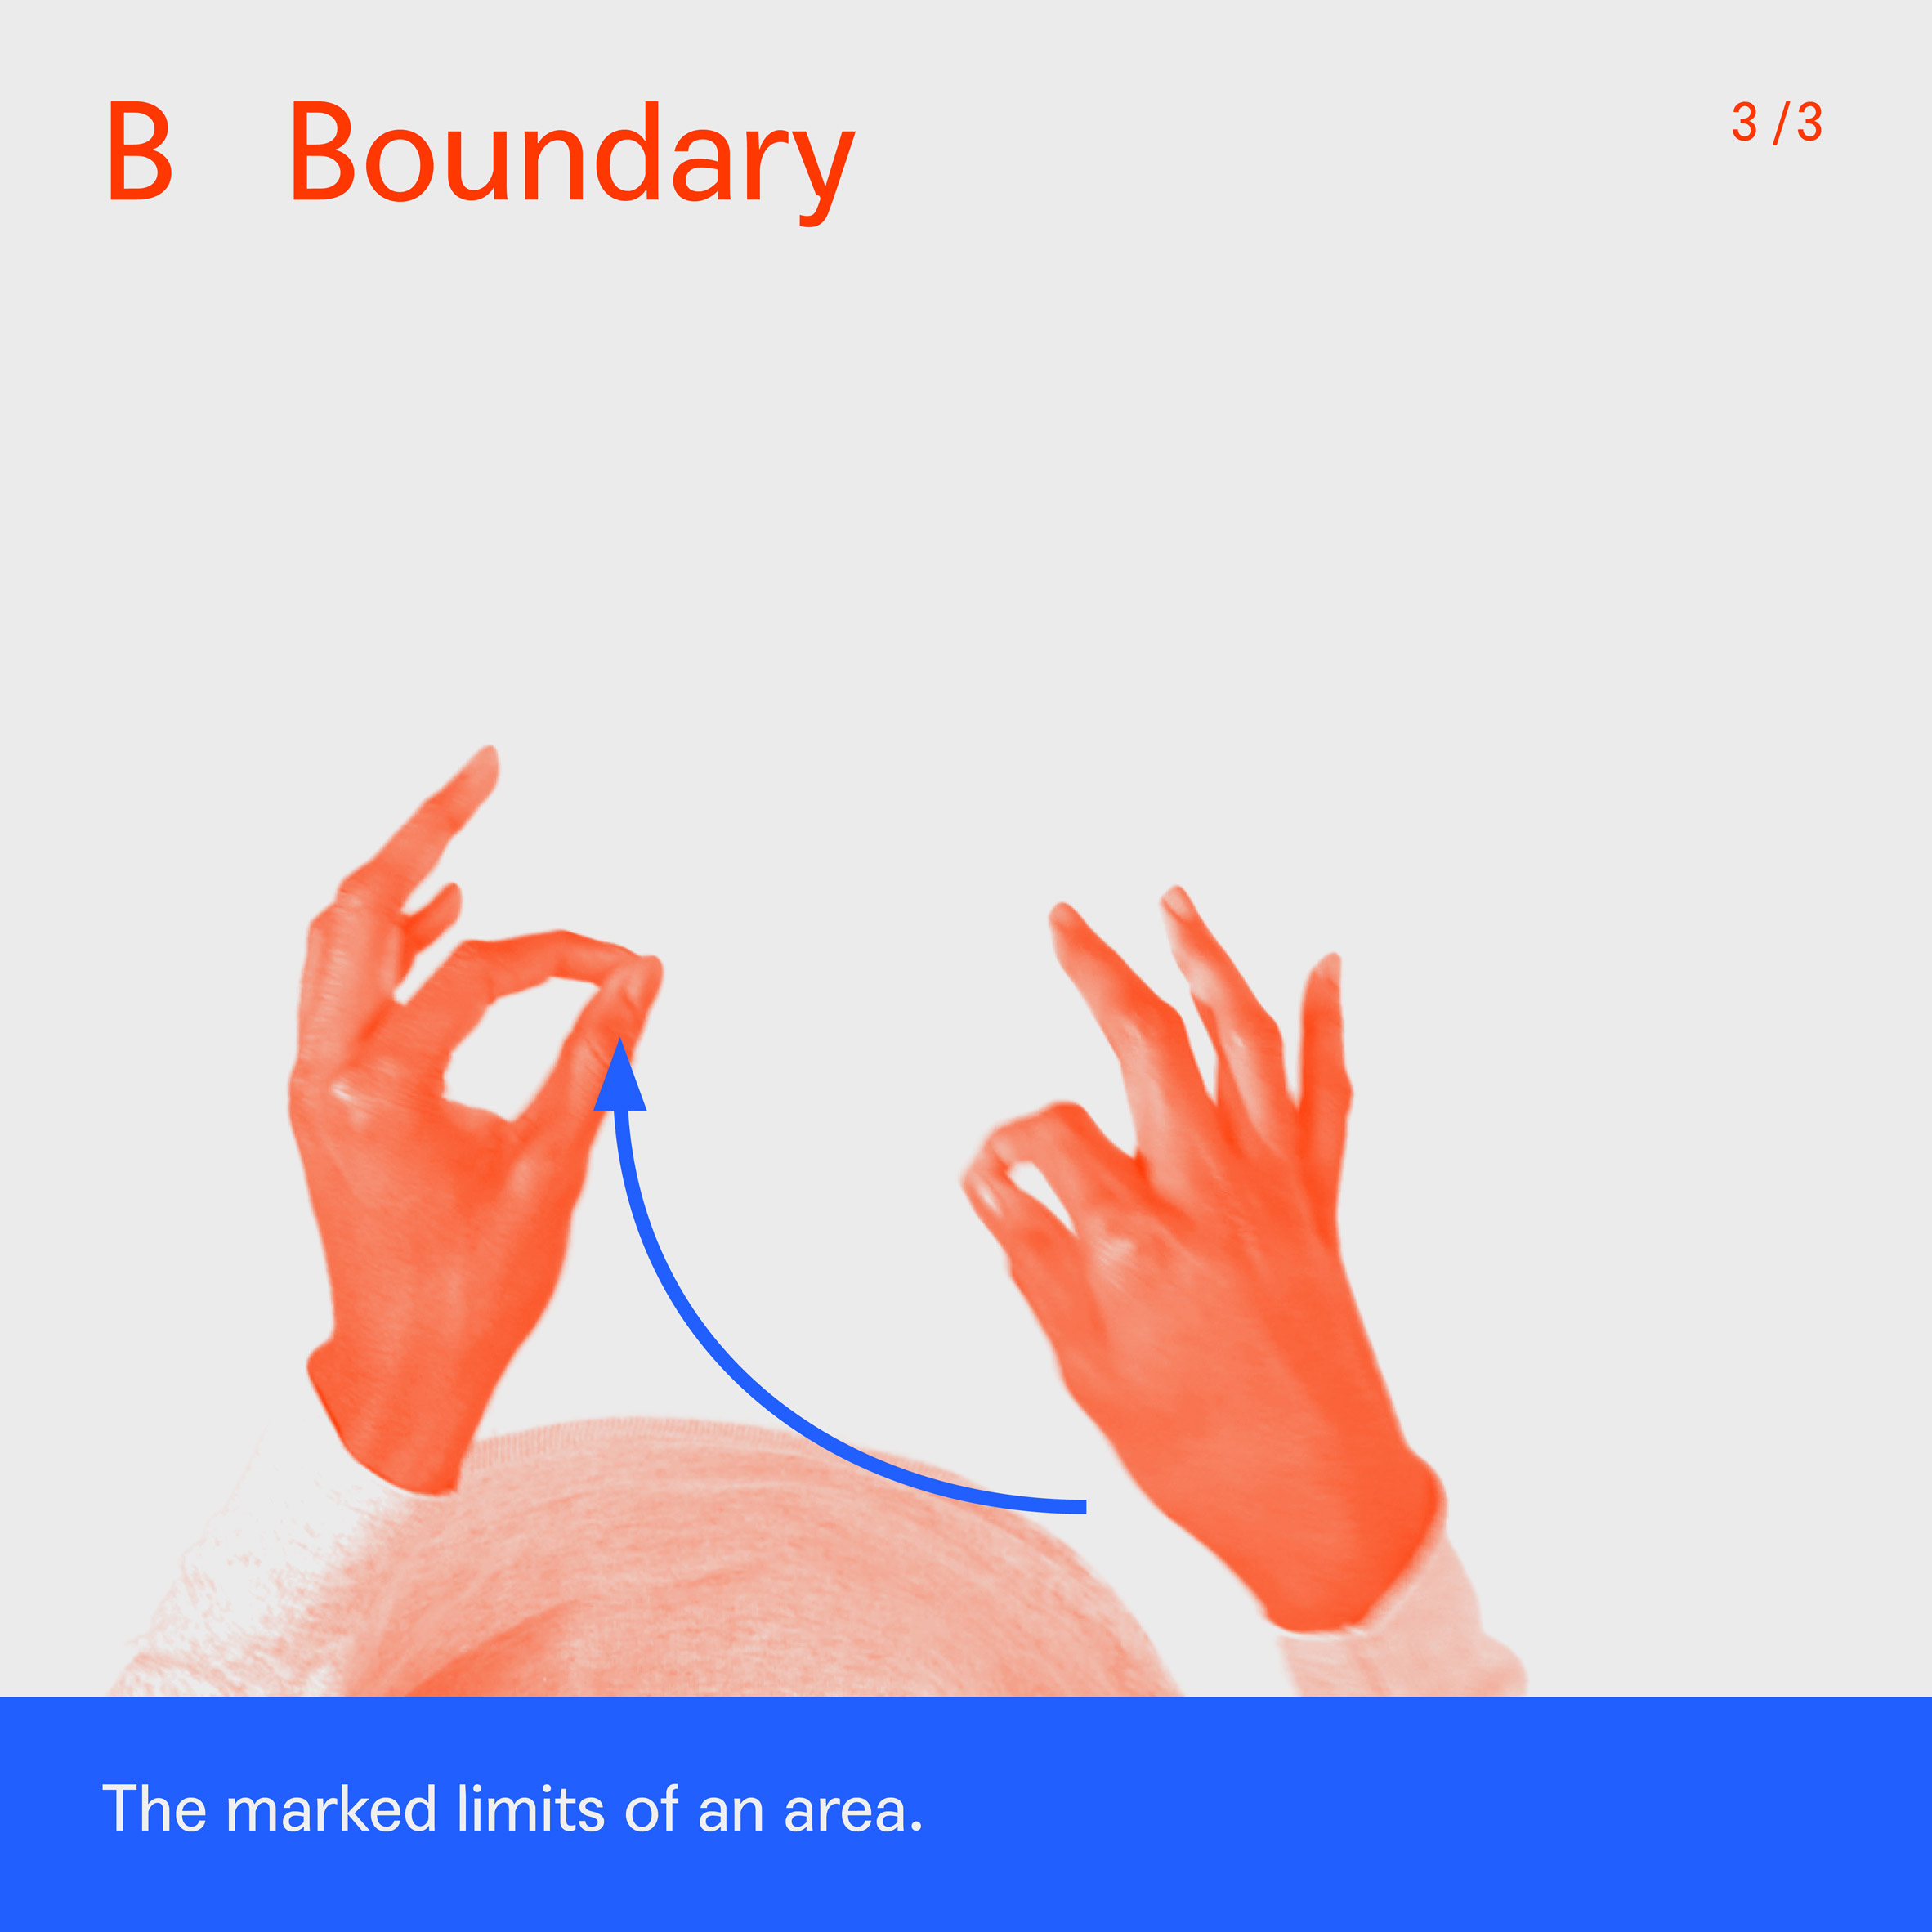 Sign for boundary developed by Signstrokes